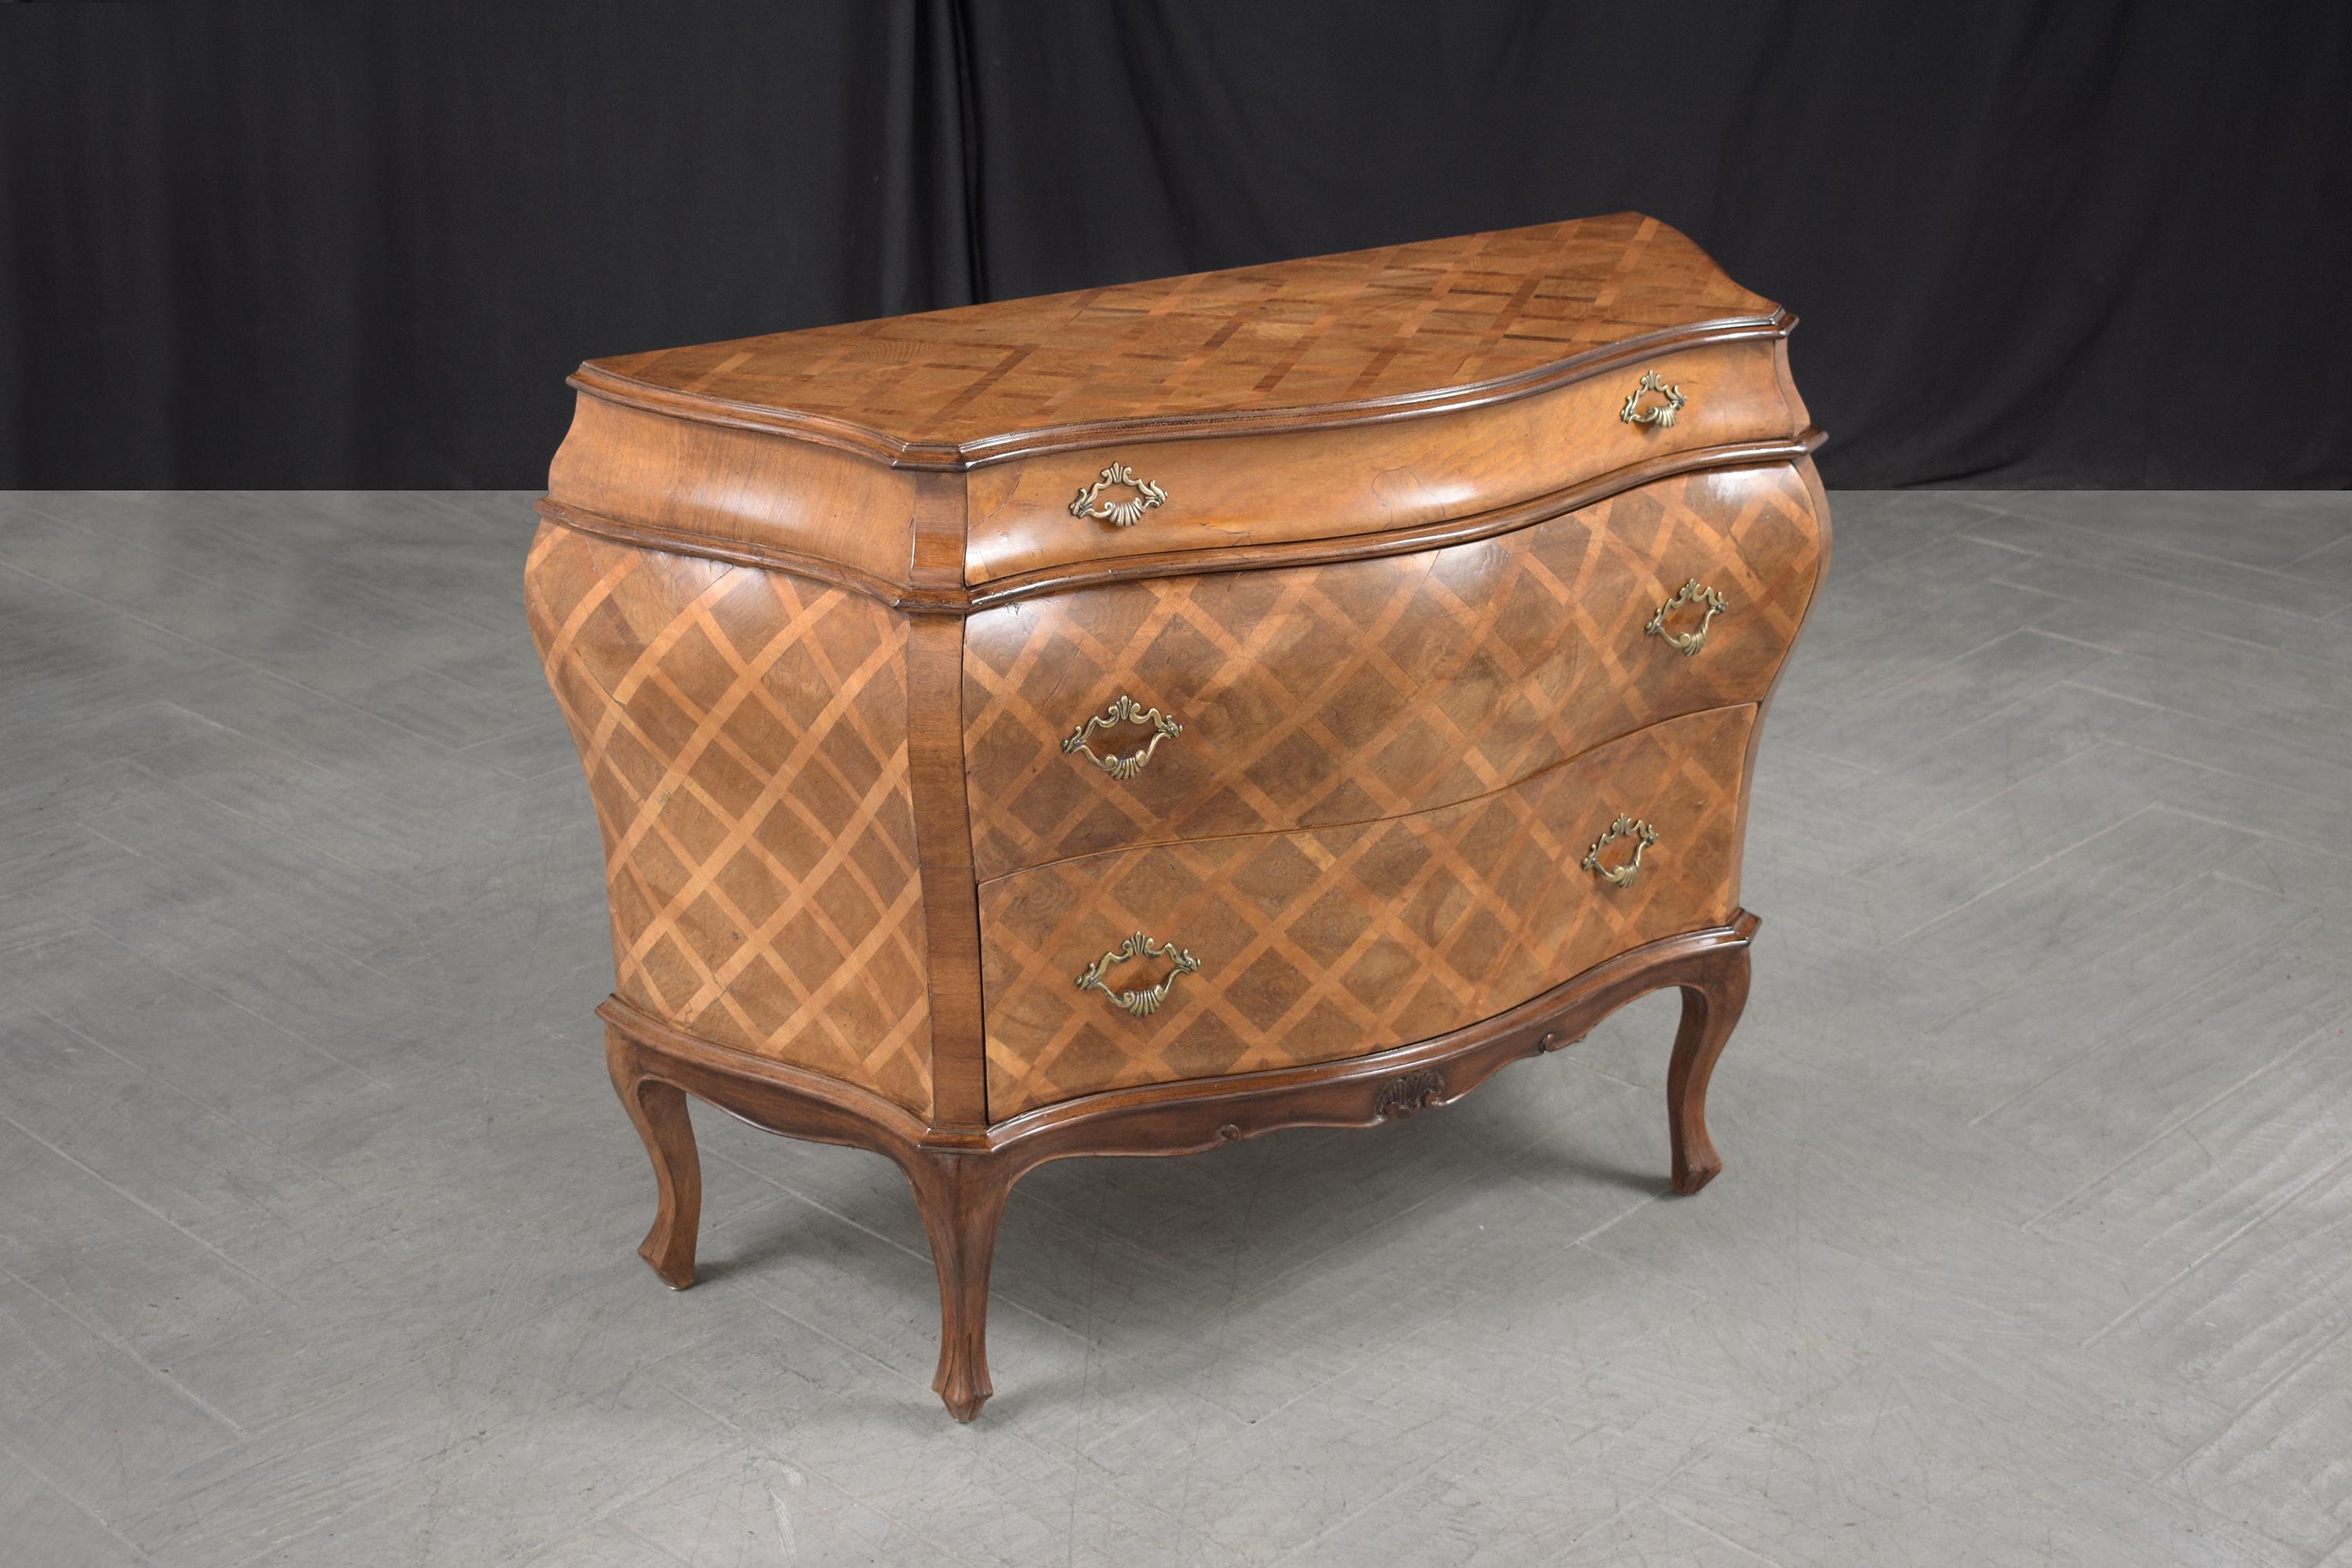 Baroque Italian Vintage Commode: Restored Wood and Marquetry Veneer Bombay Chest